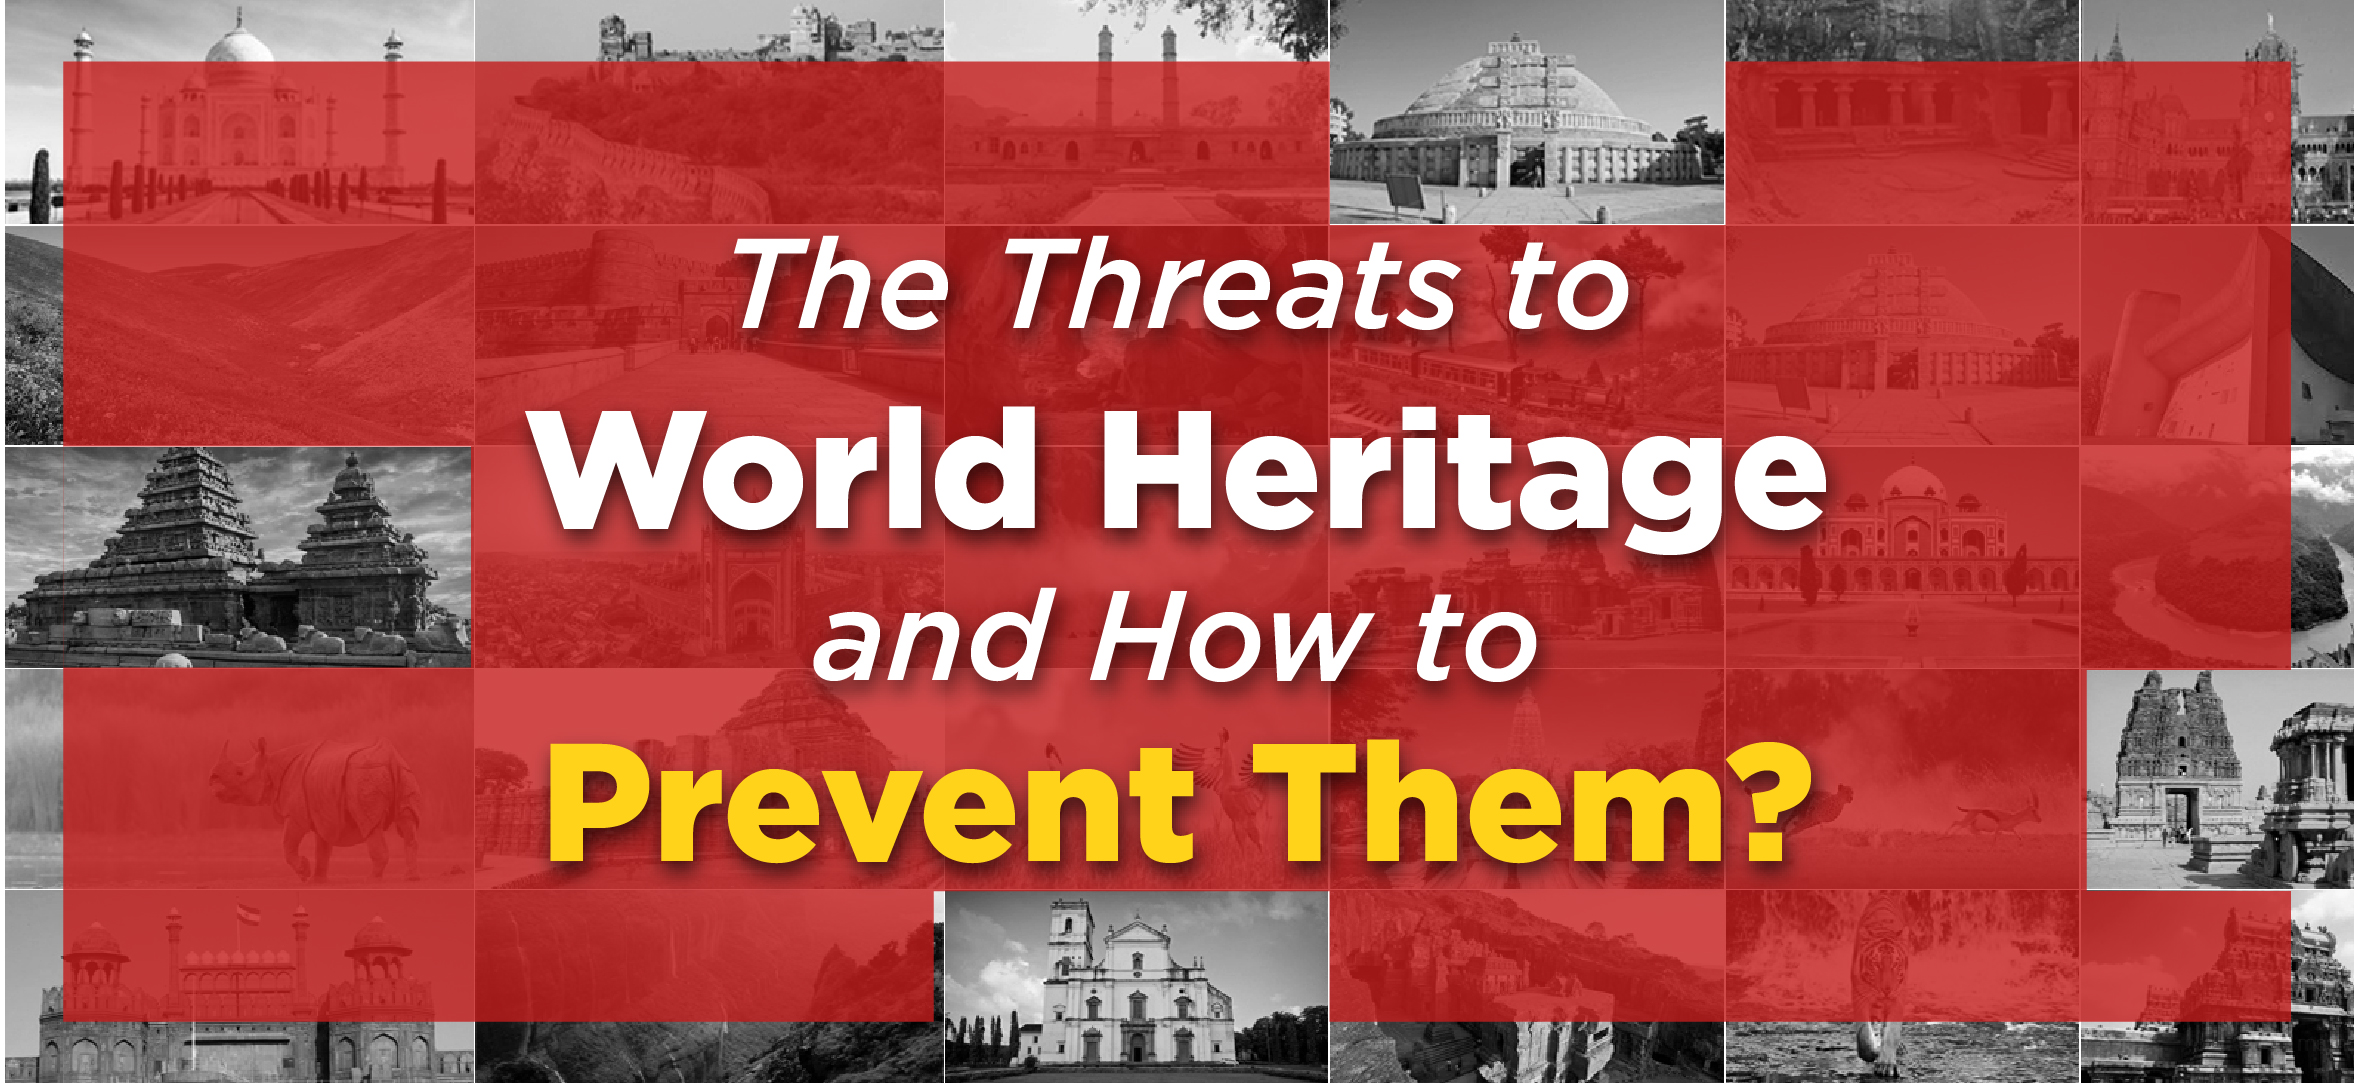 The Threats to World Heritage and How to Prevent Them?